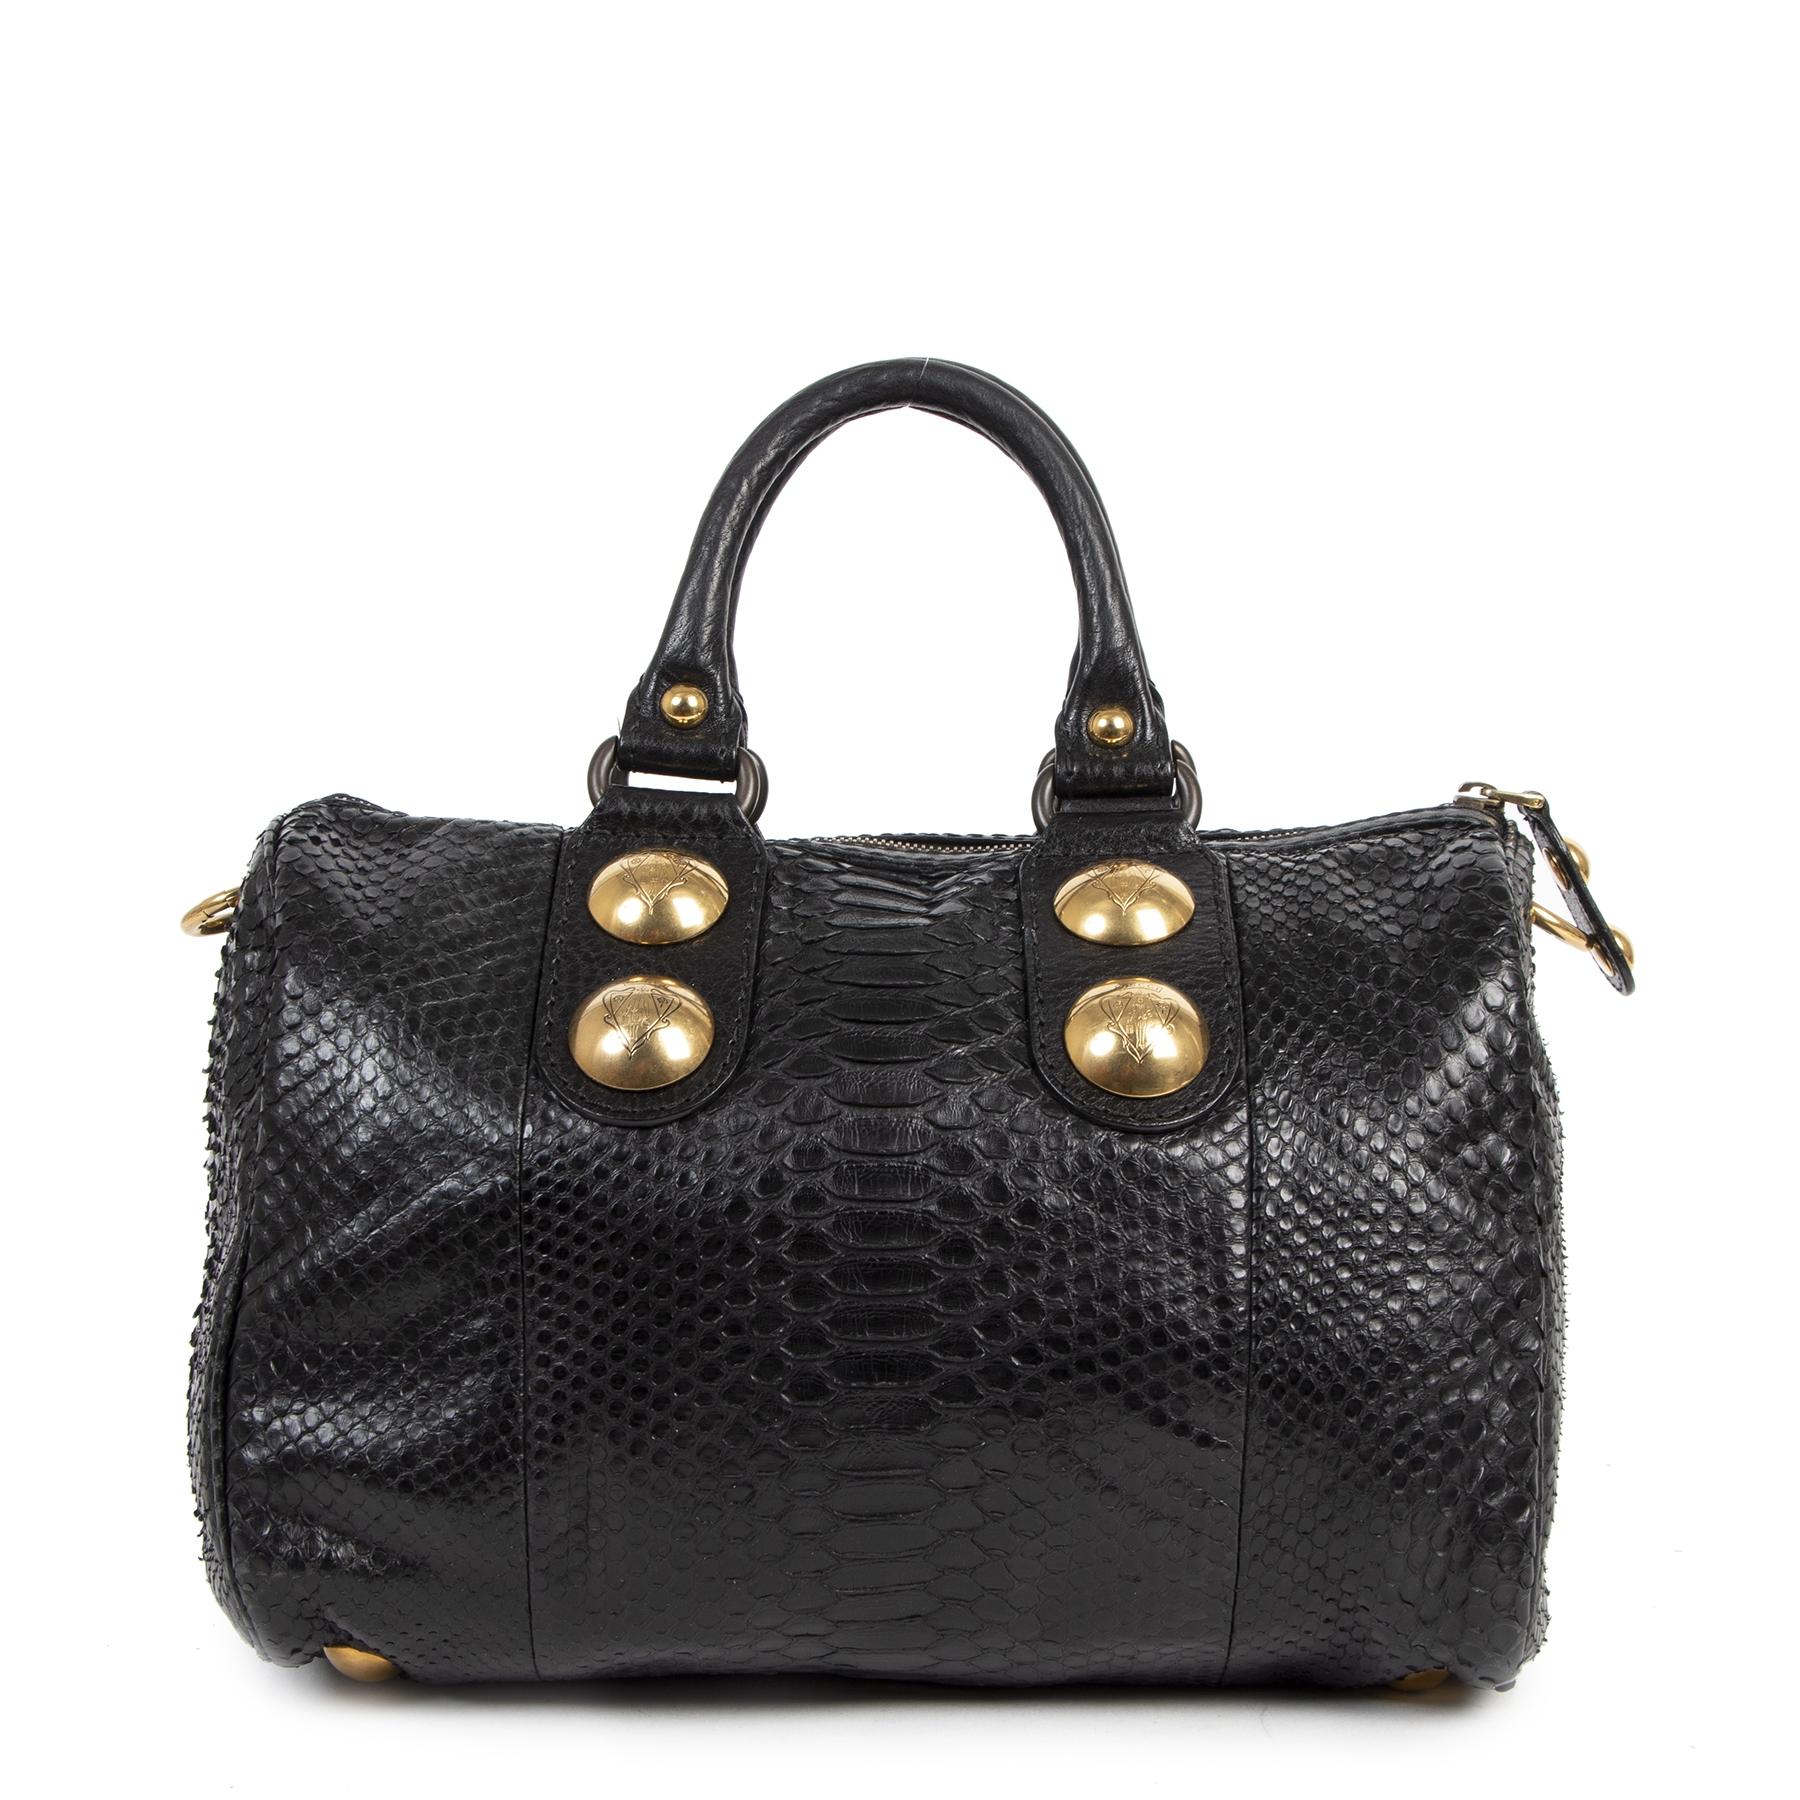 Very good condition

Gucci Babouska Boston Bag Black Python Skin Leather

Stand out with this Gucci Babouska Boston bag. The bag is crafted out of beautiful black python skin leather and features dual rolled top handles, gold-toned hardware and logo